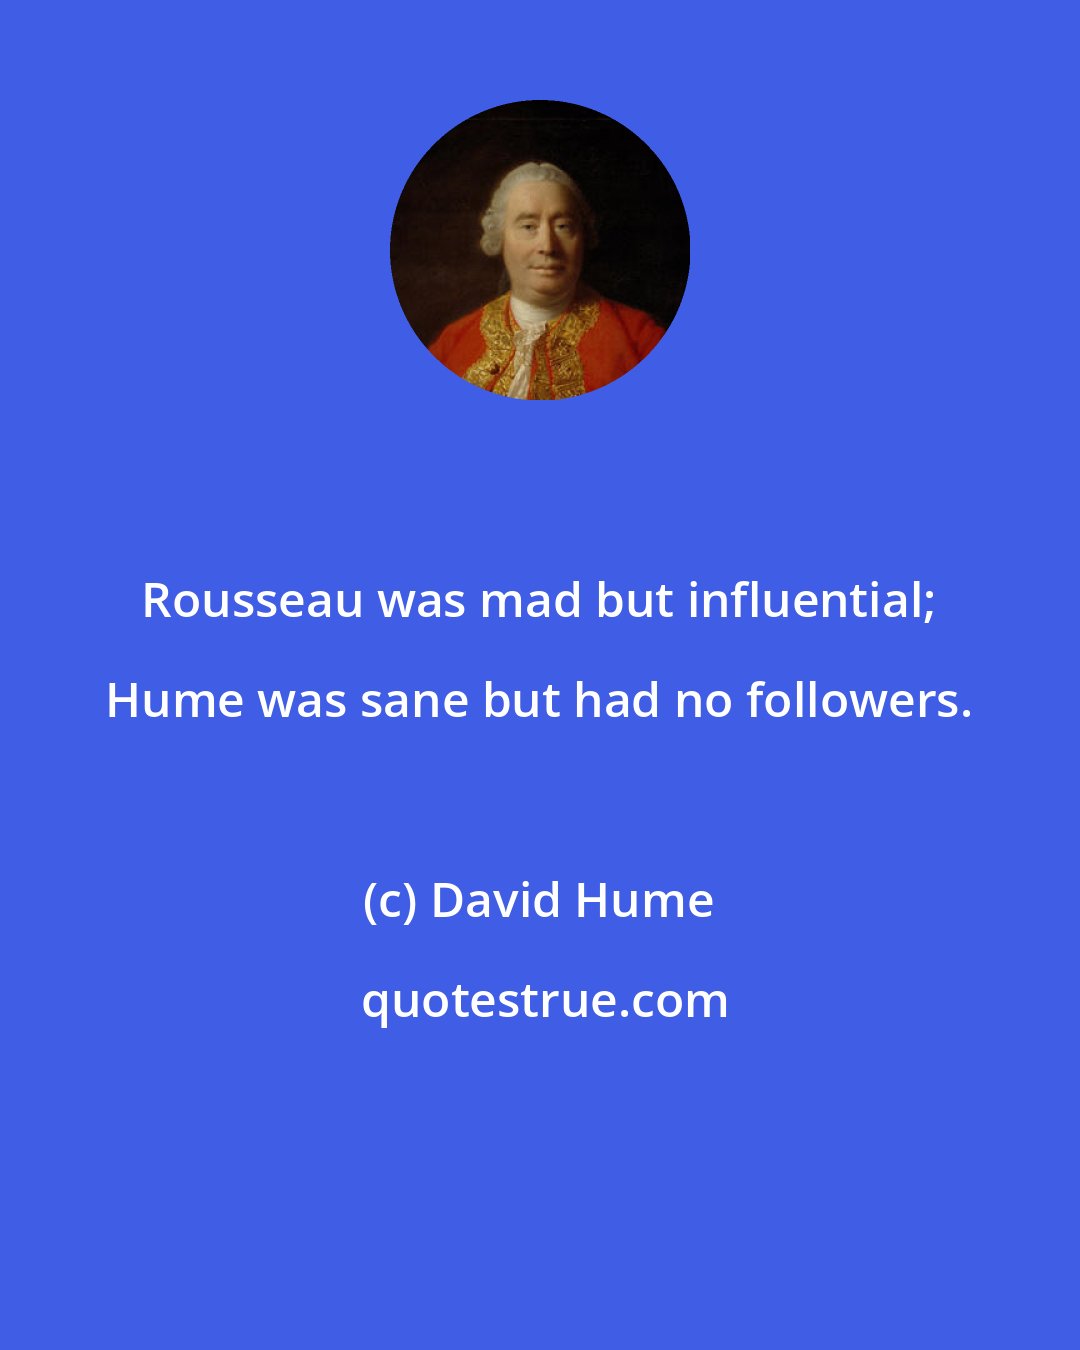 David Hume: Rousseau was mad but influential; Hume was sane but had no followers.